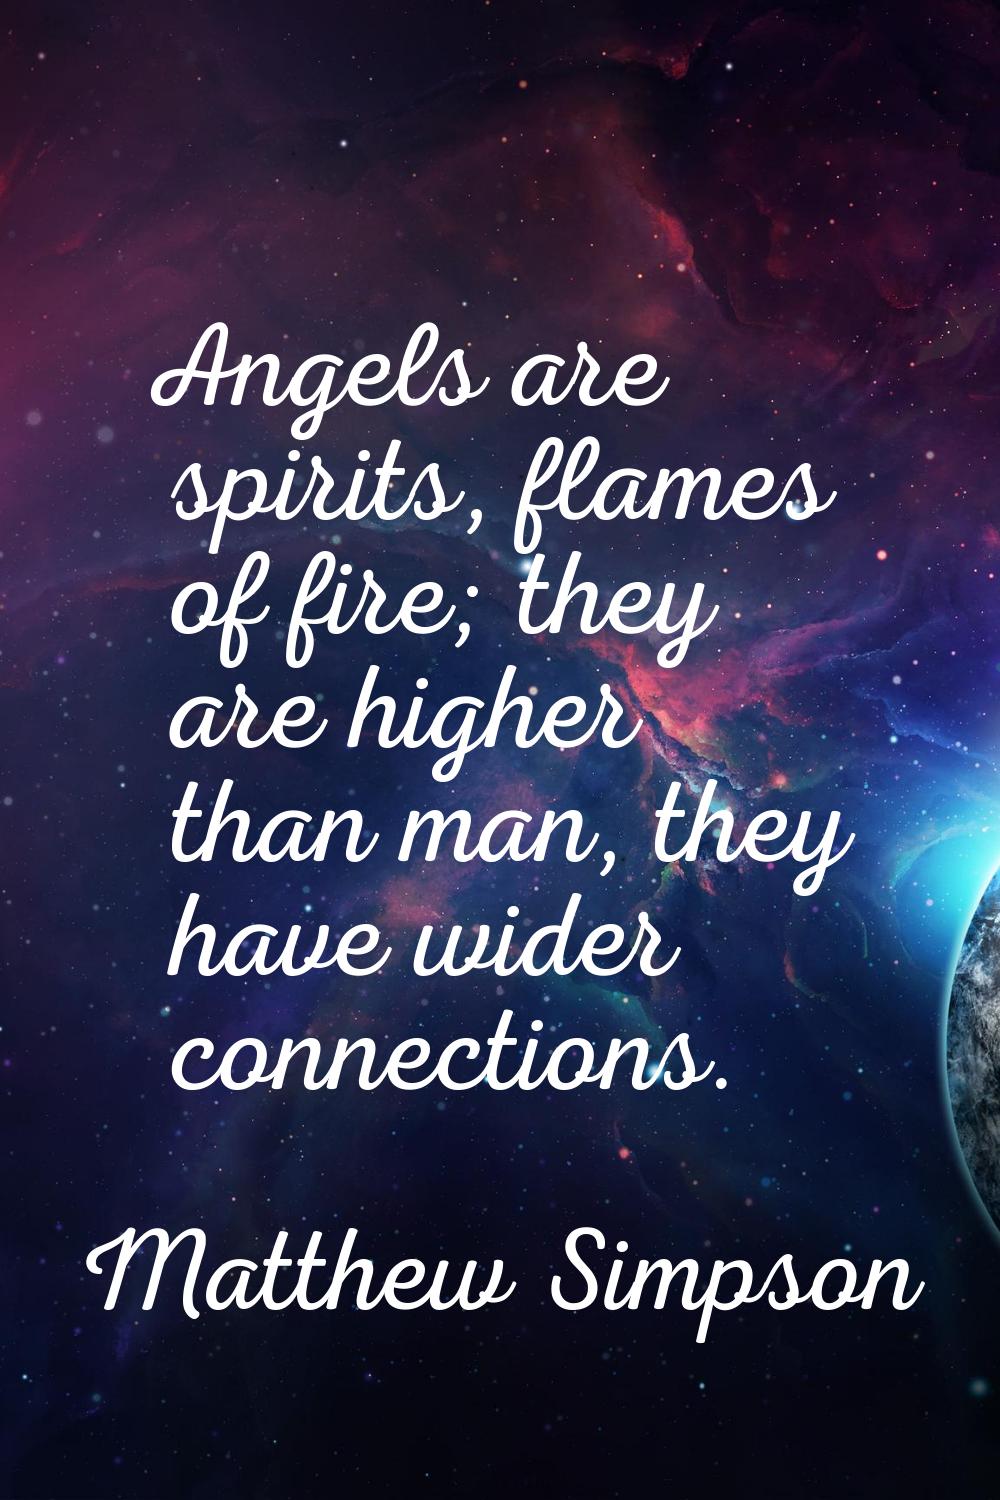 Angels are spirits, flames of fire; they are higher than man, they have wider connections.